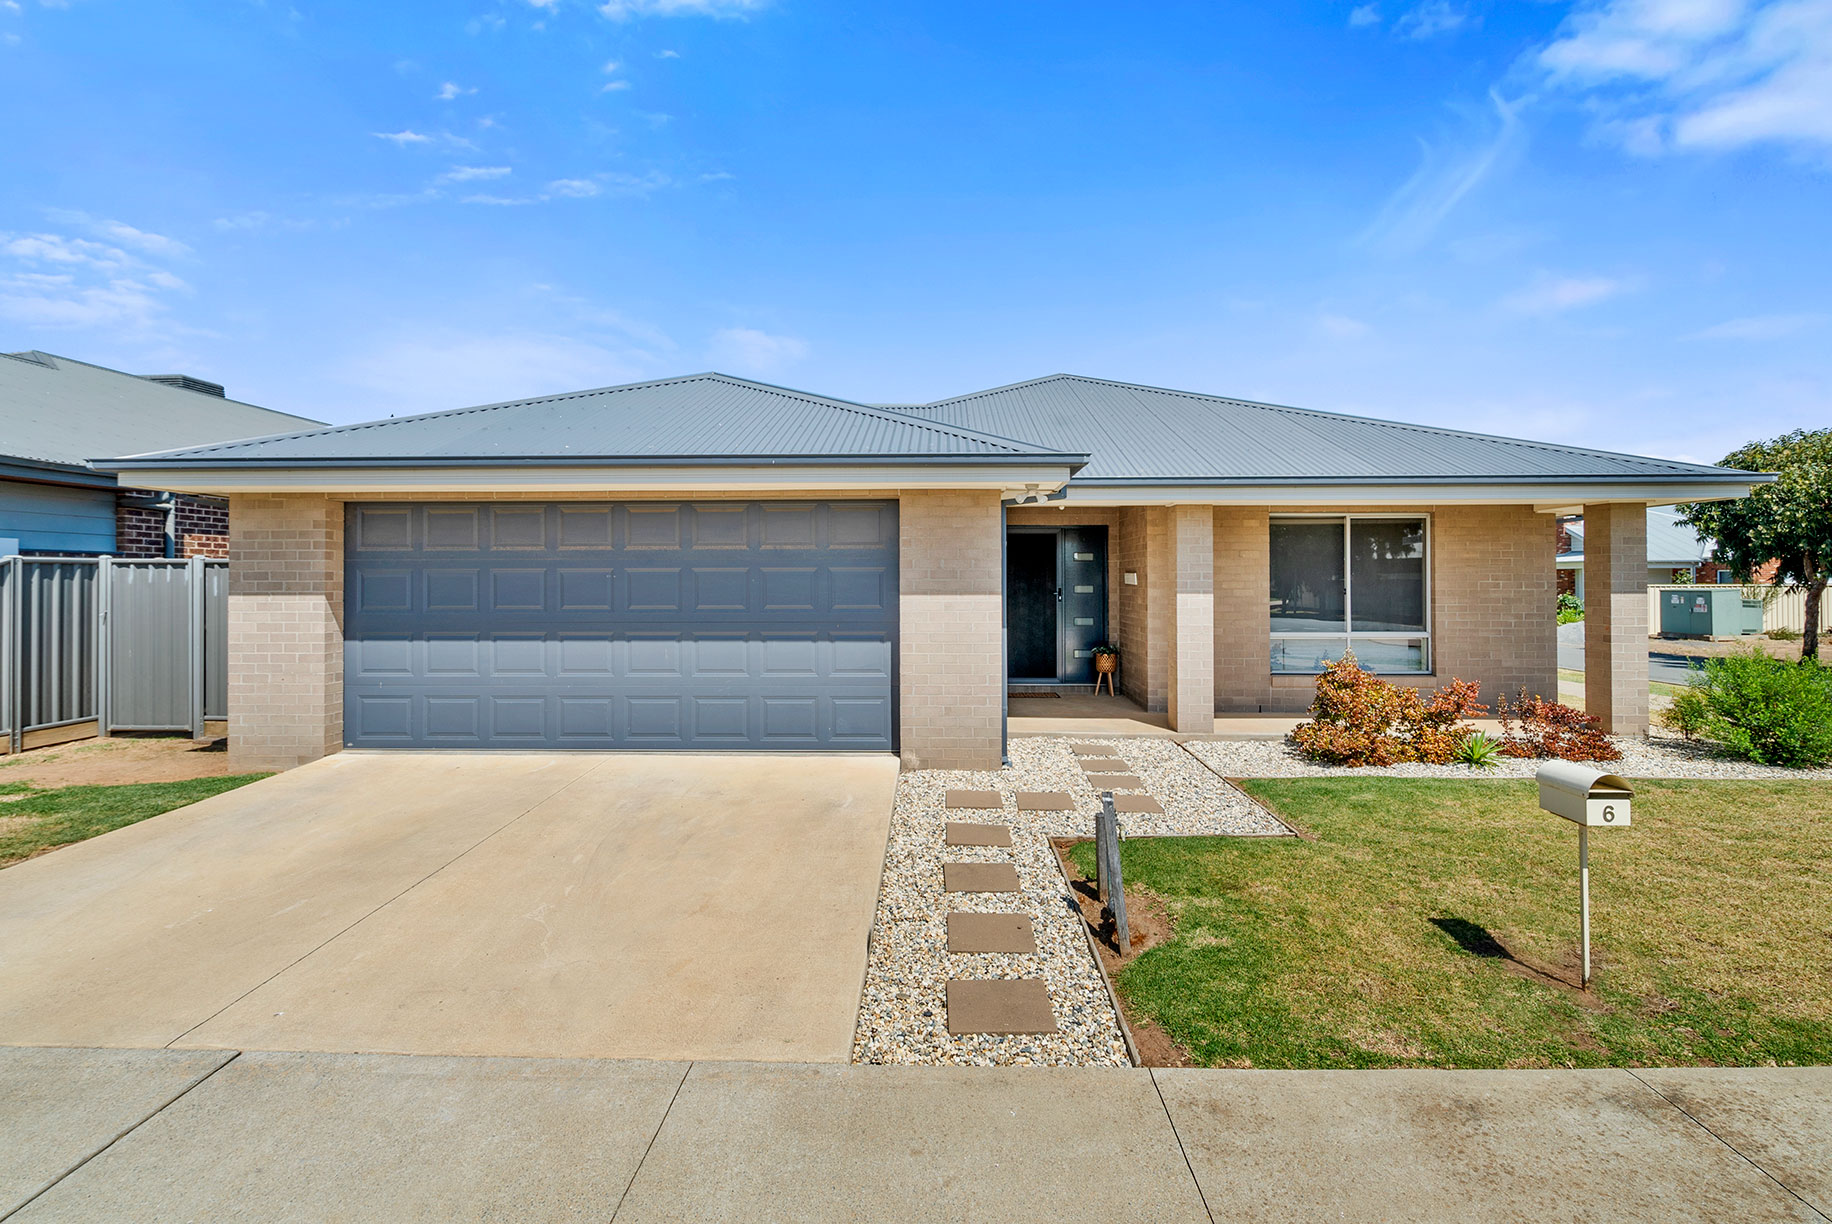 6 Courtney Street, Yarrawonga, listed by Arron Robinson of Anthony Stevens (real estate